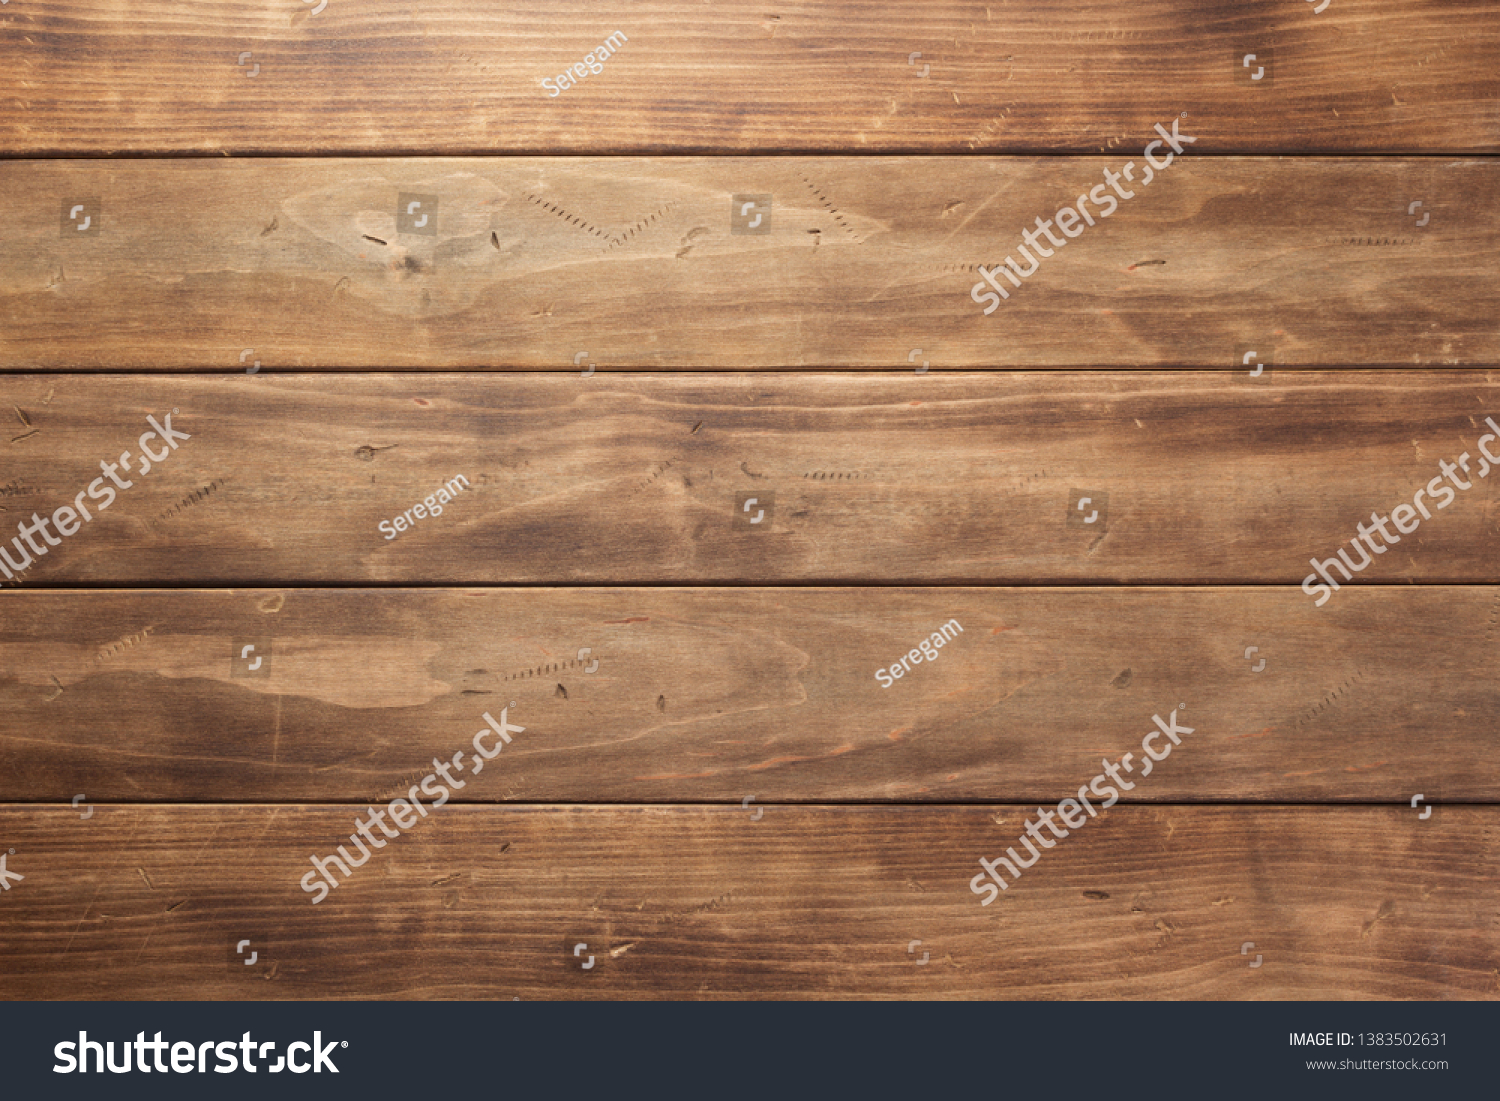 shabby wooden background texture surface #1383502631